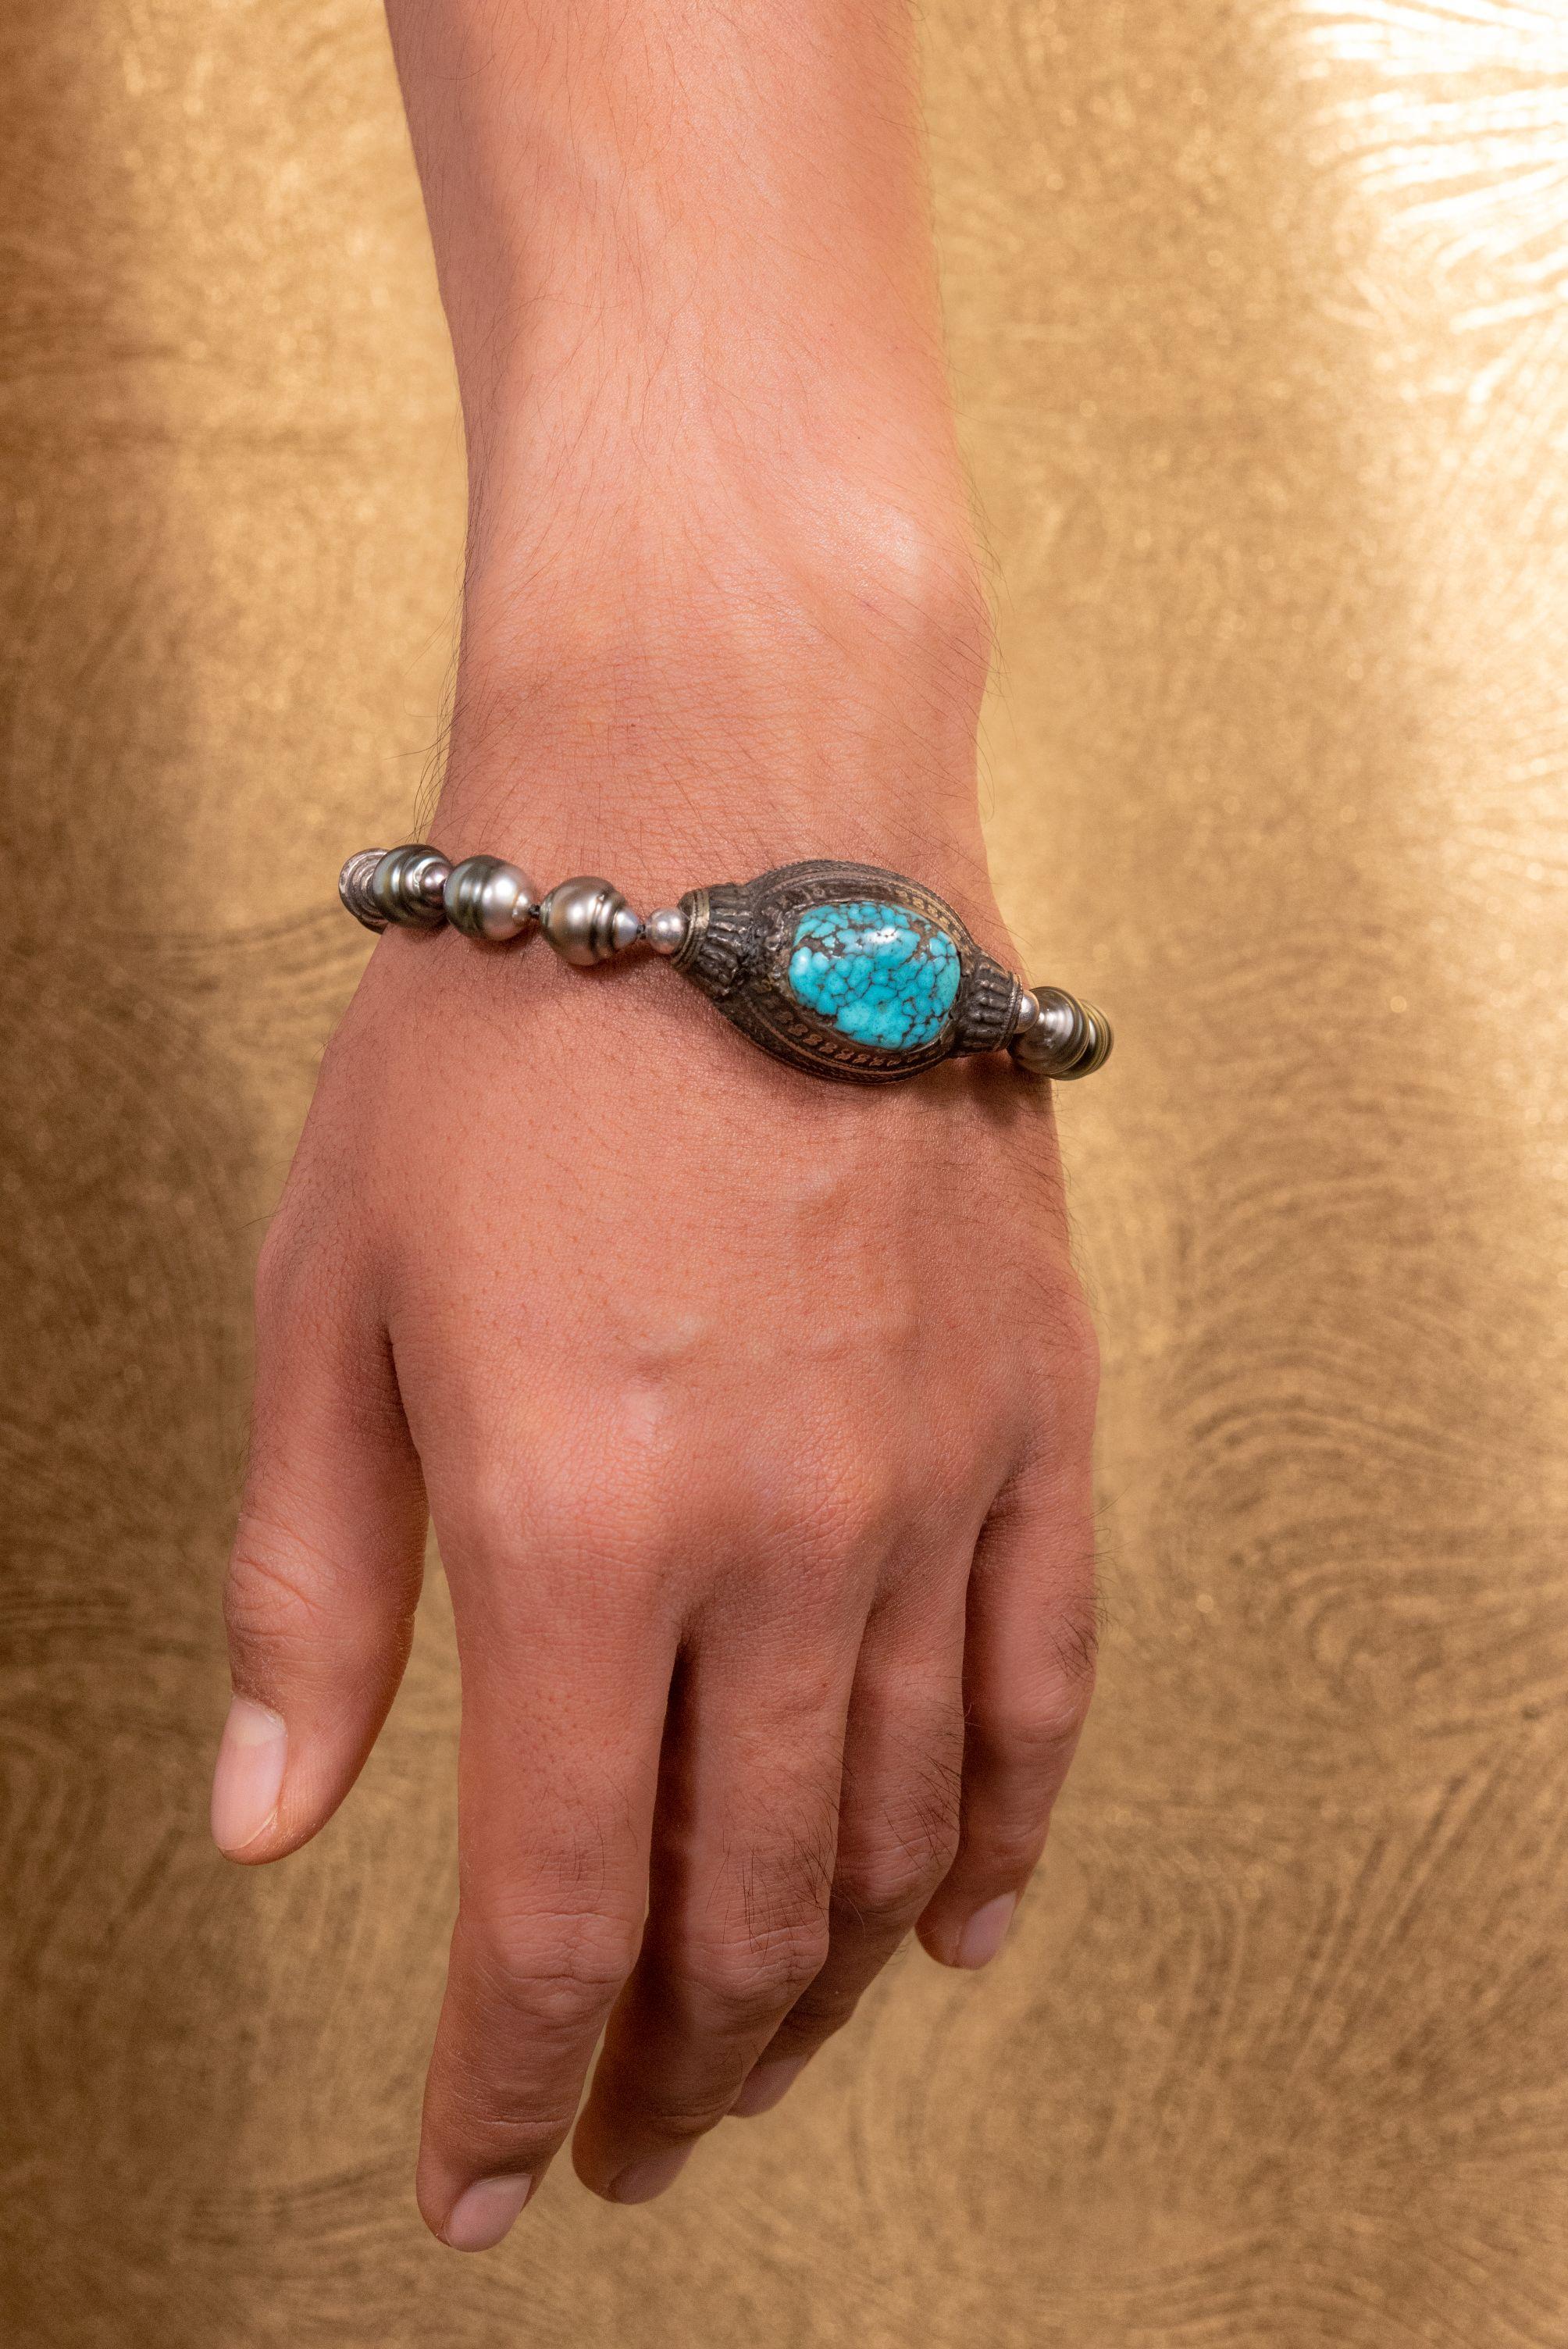 Add a touch of vintage colour to your day with our Tibetan turquoise and pearl bracelet. Surrounded by shimmering Tahitian pearls, this vintage Tibetan medallion with intricate detail and vivid turquoise is the star of the show. 

Bracelet size: